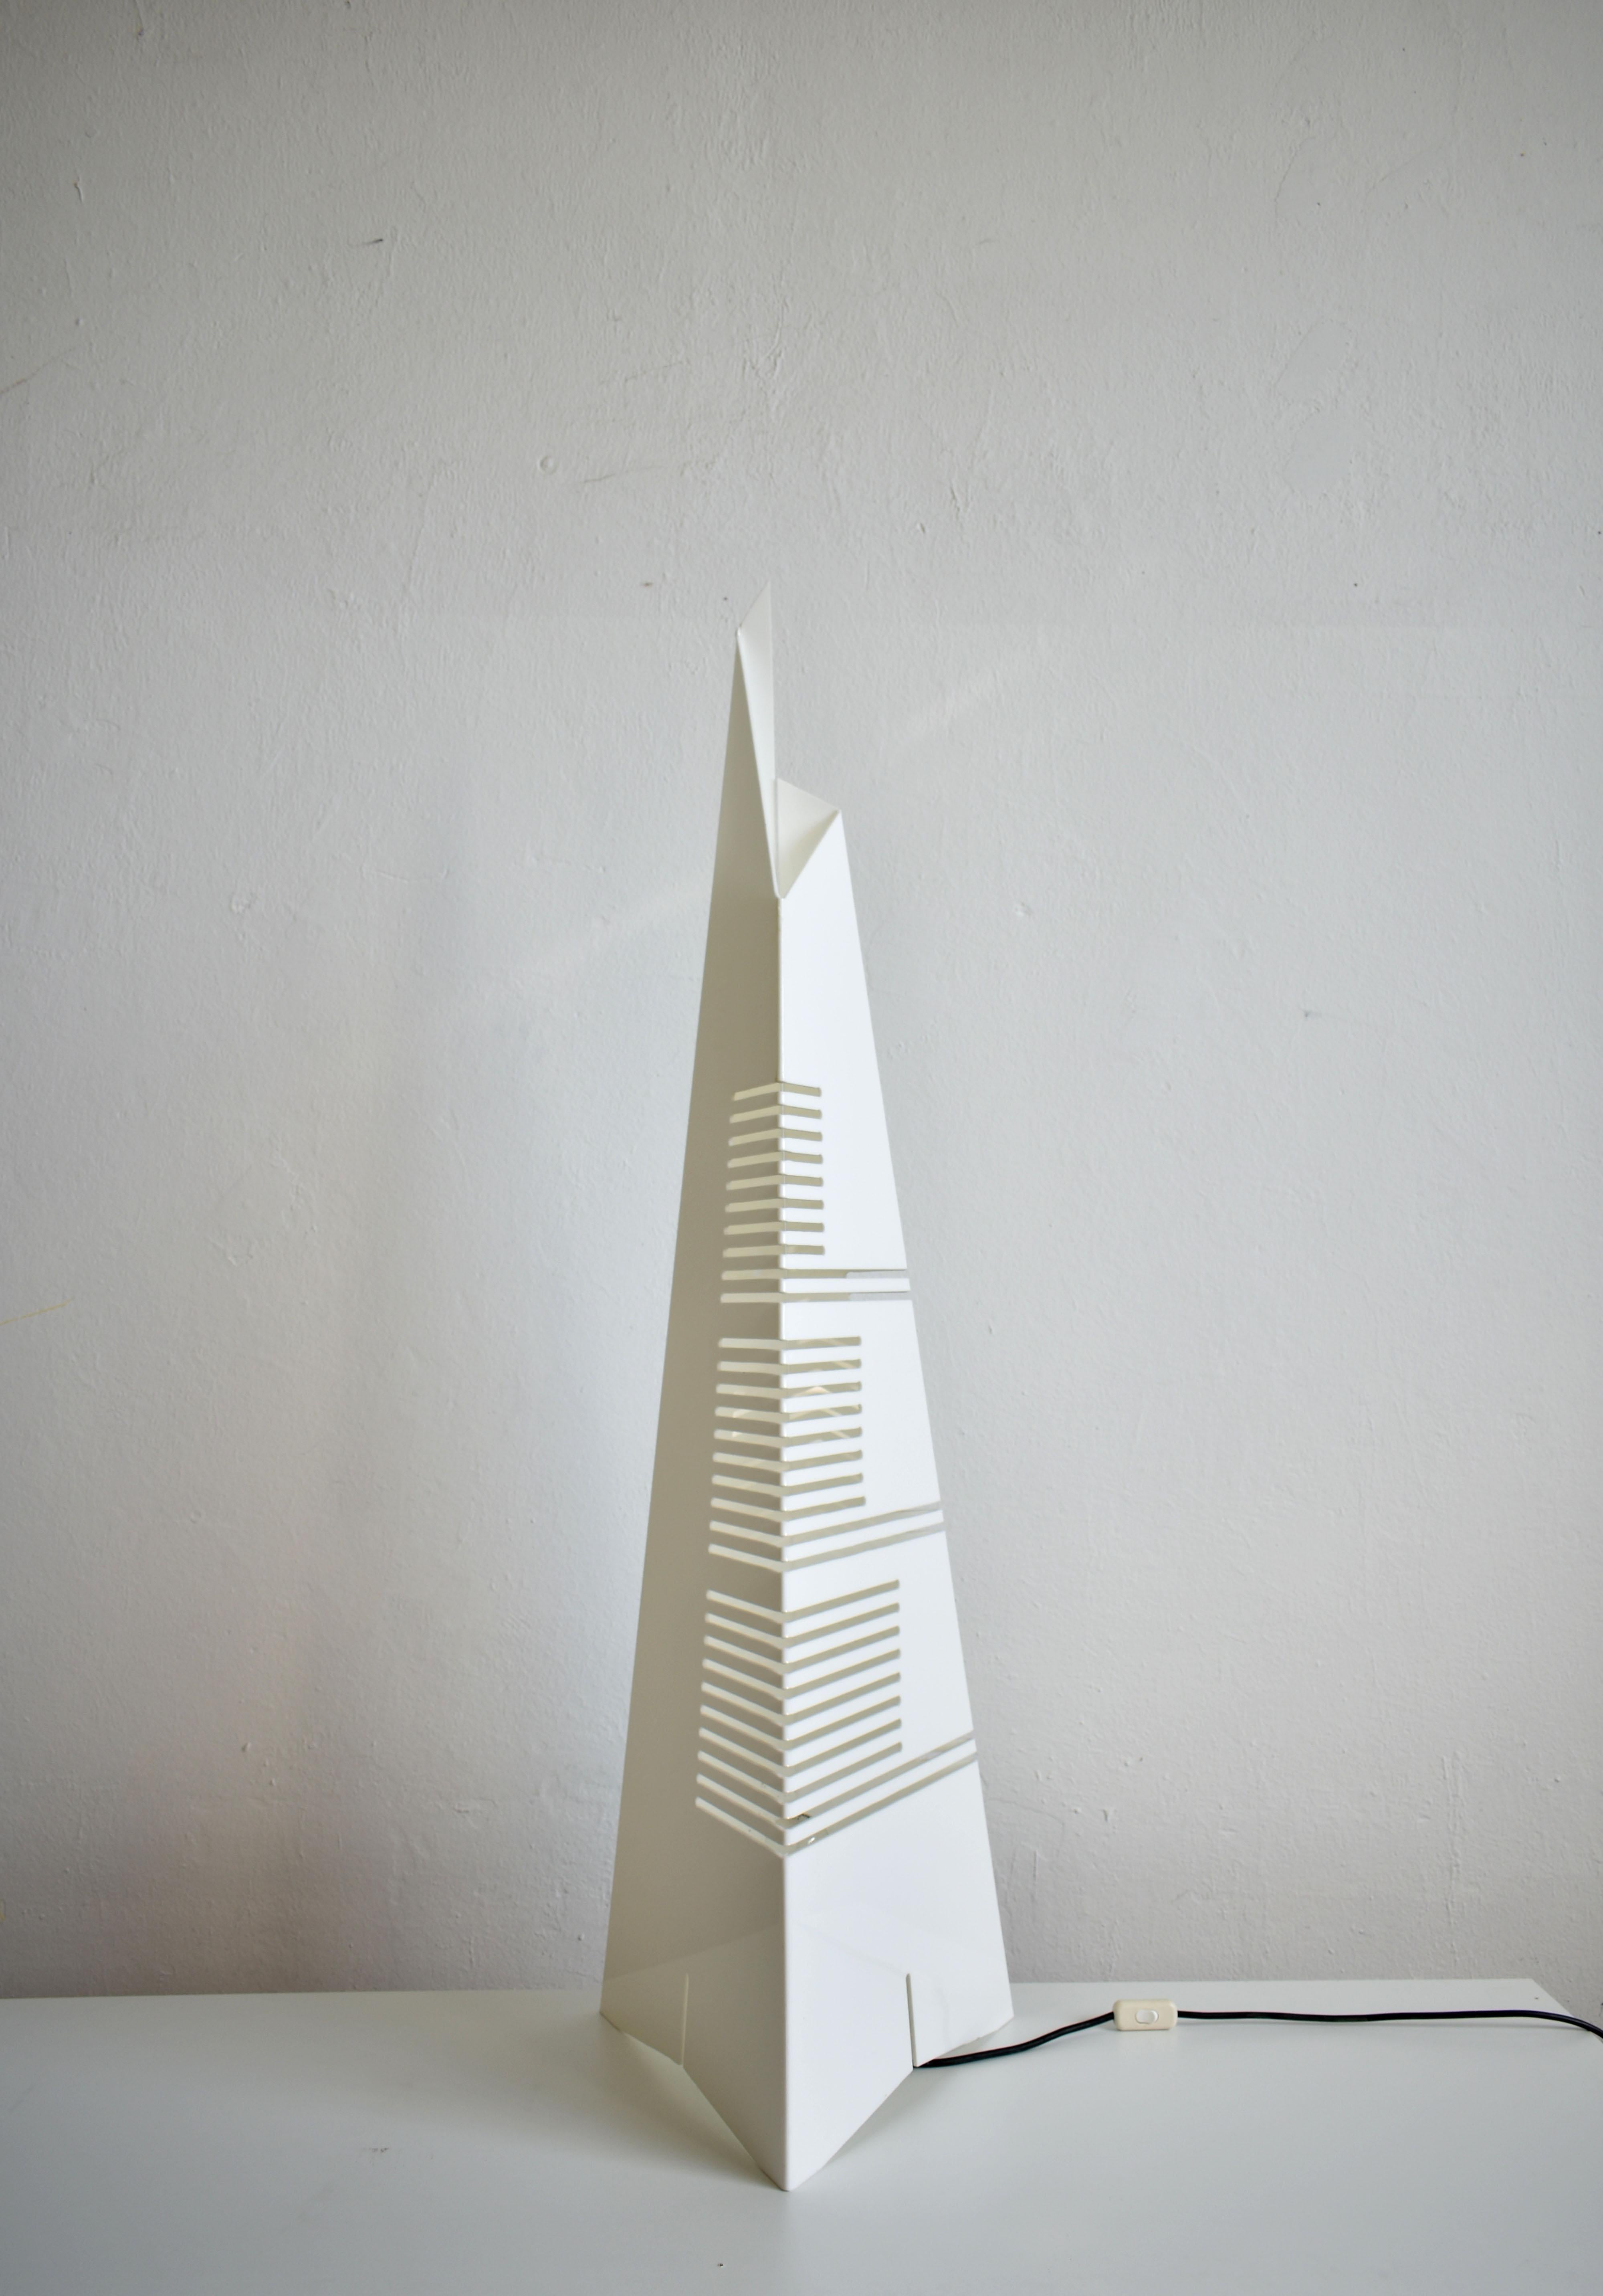 A rare architectural floor lamp 'Personaggi' made of white blended plexiglass sheet with geometrical cuts that form a pyramidal skyscraper

Designed in 1971 by Carmellini and Tronconi for Tronconi

The lamp has European plug, an E27 lamp socket